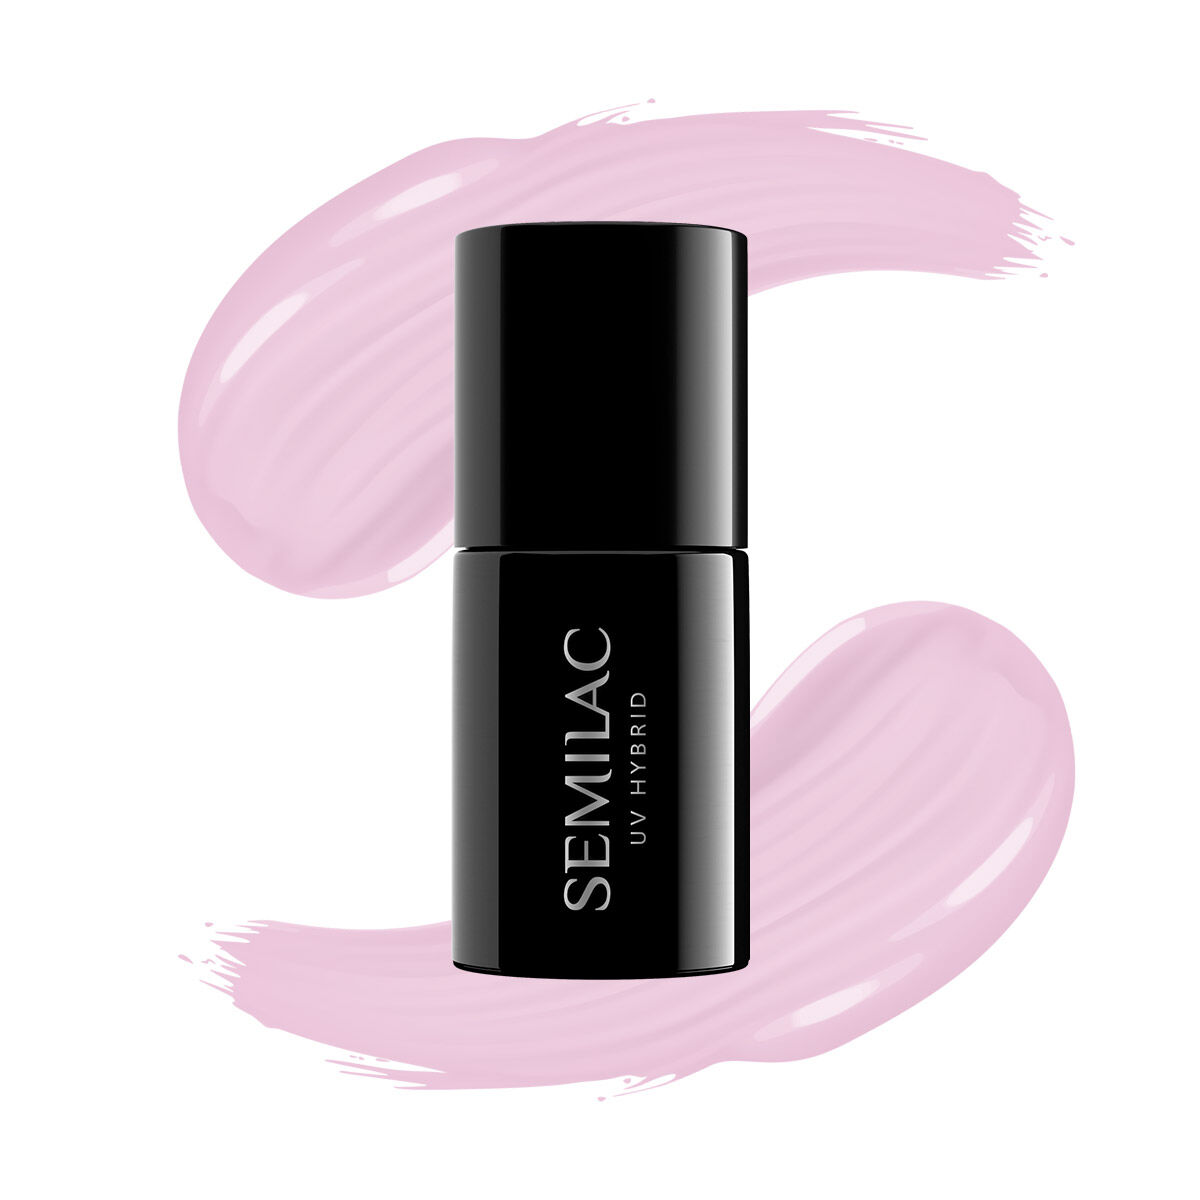 SEMILAC Extend 5in1 - 7 ml - No. 803 Delicate Pink